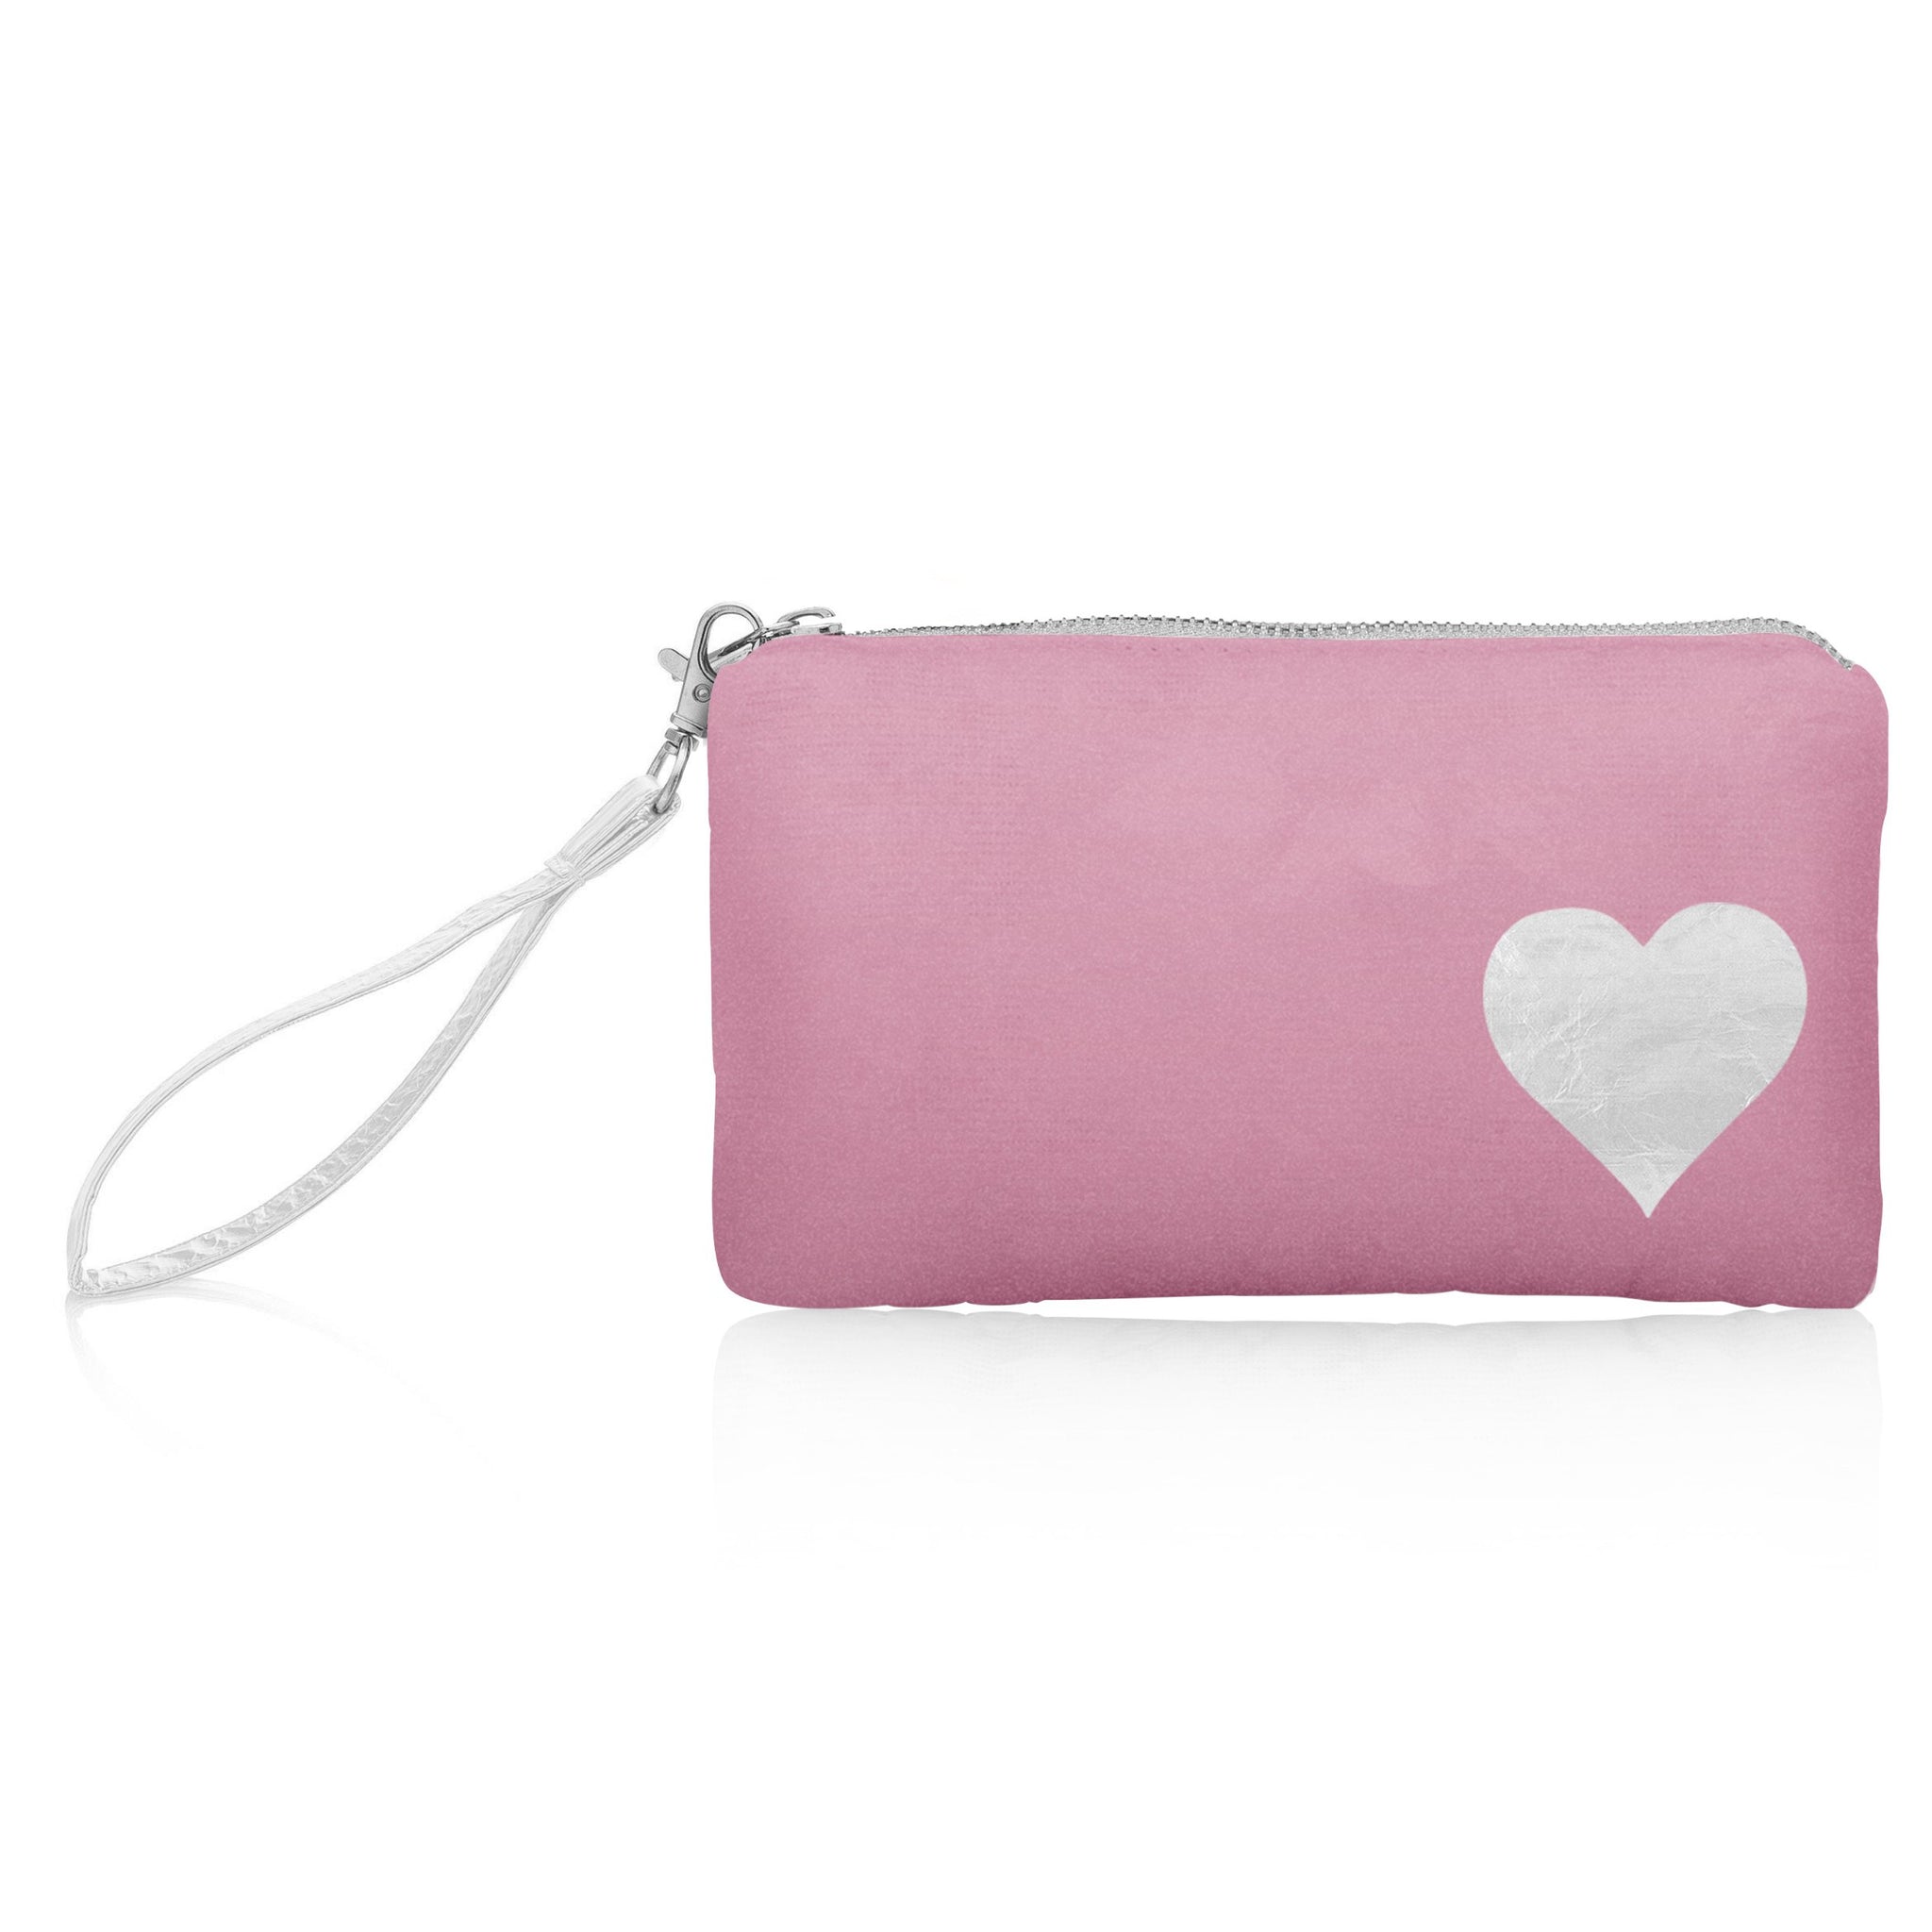 Zip Wristlet - Fairy Pink with Silver Heart